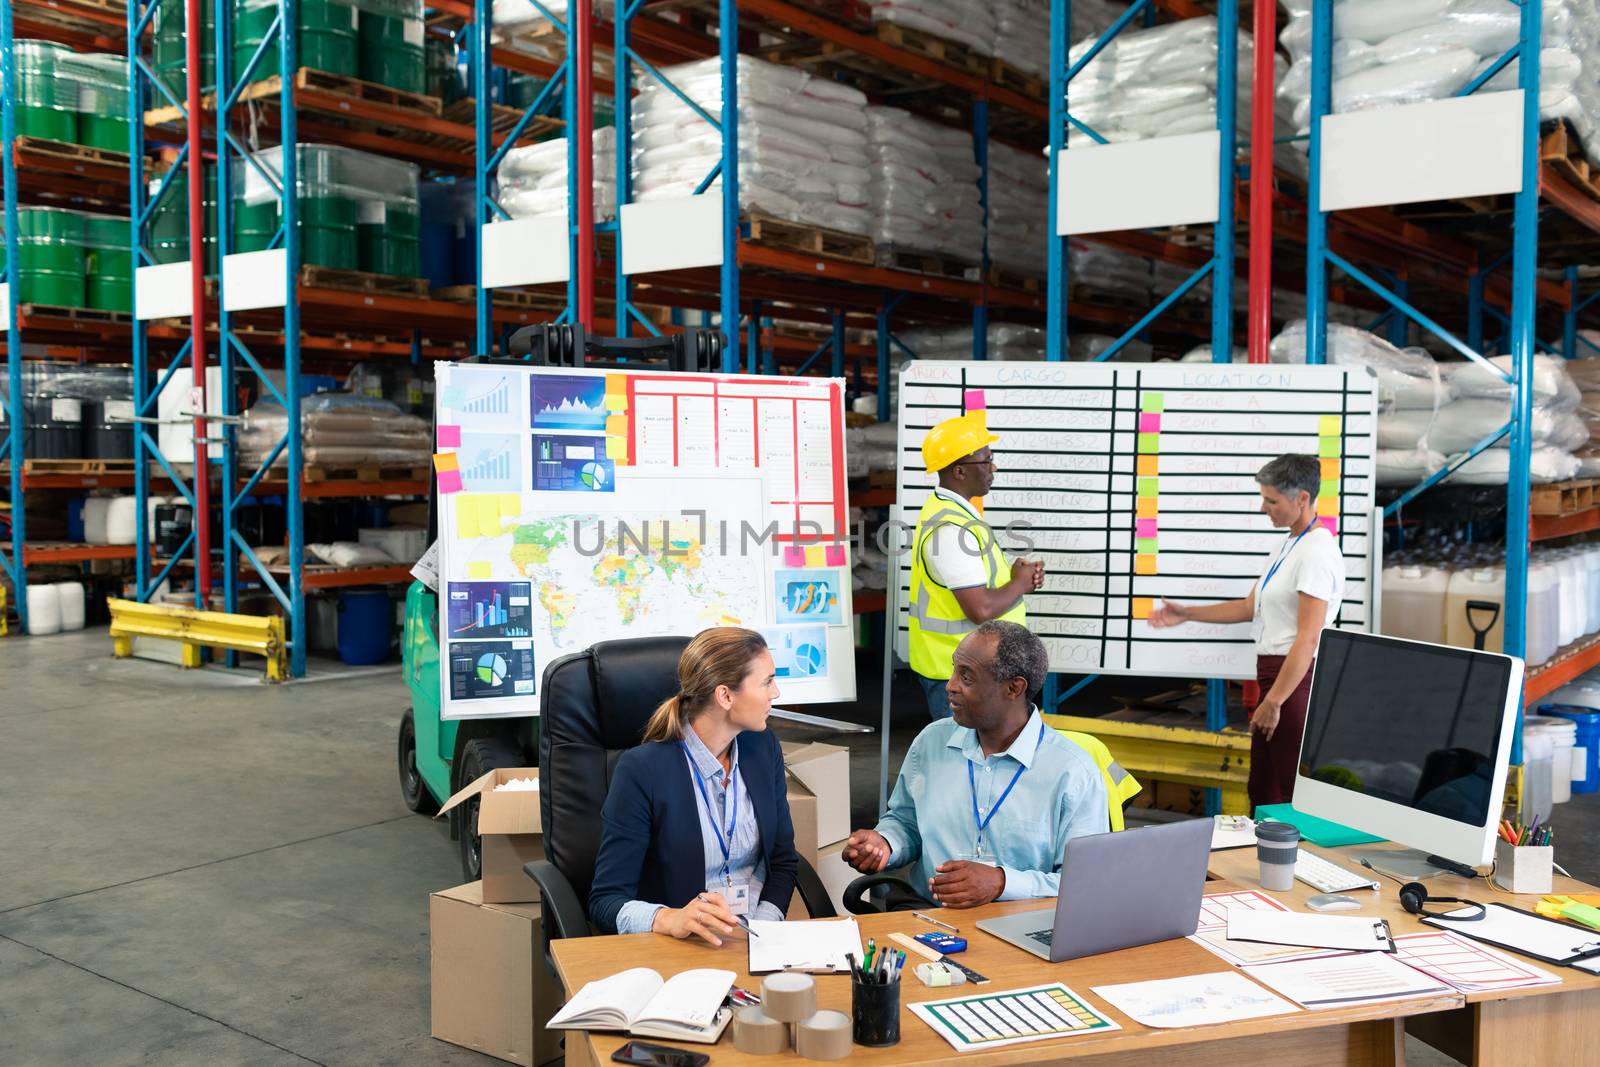 High angle view of Caucasian female manager and African-american male supervisor interacting with each other at desk in warehouse. This is a freight transportation and distribution warehouse. Industrial and industrial workers concept